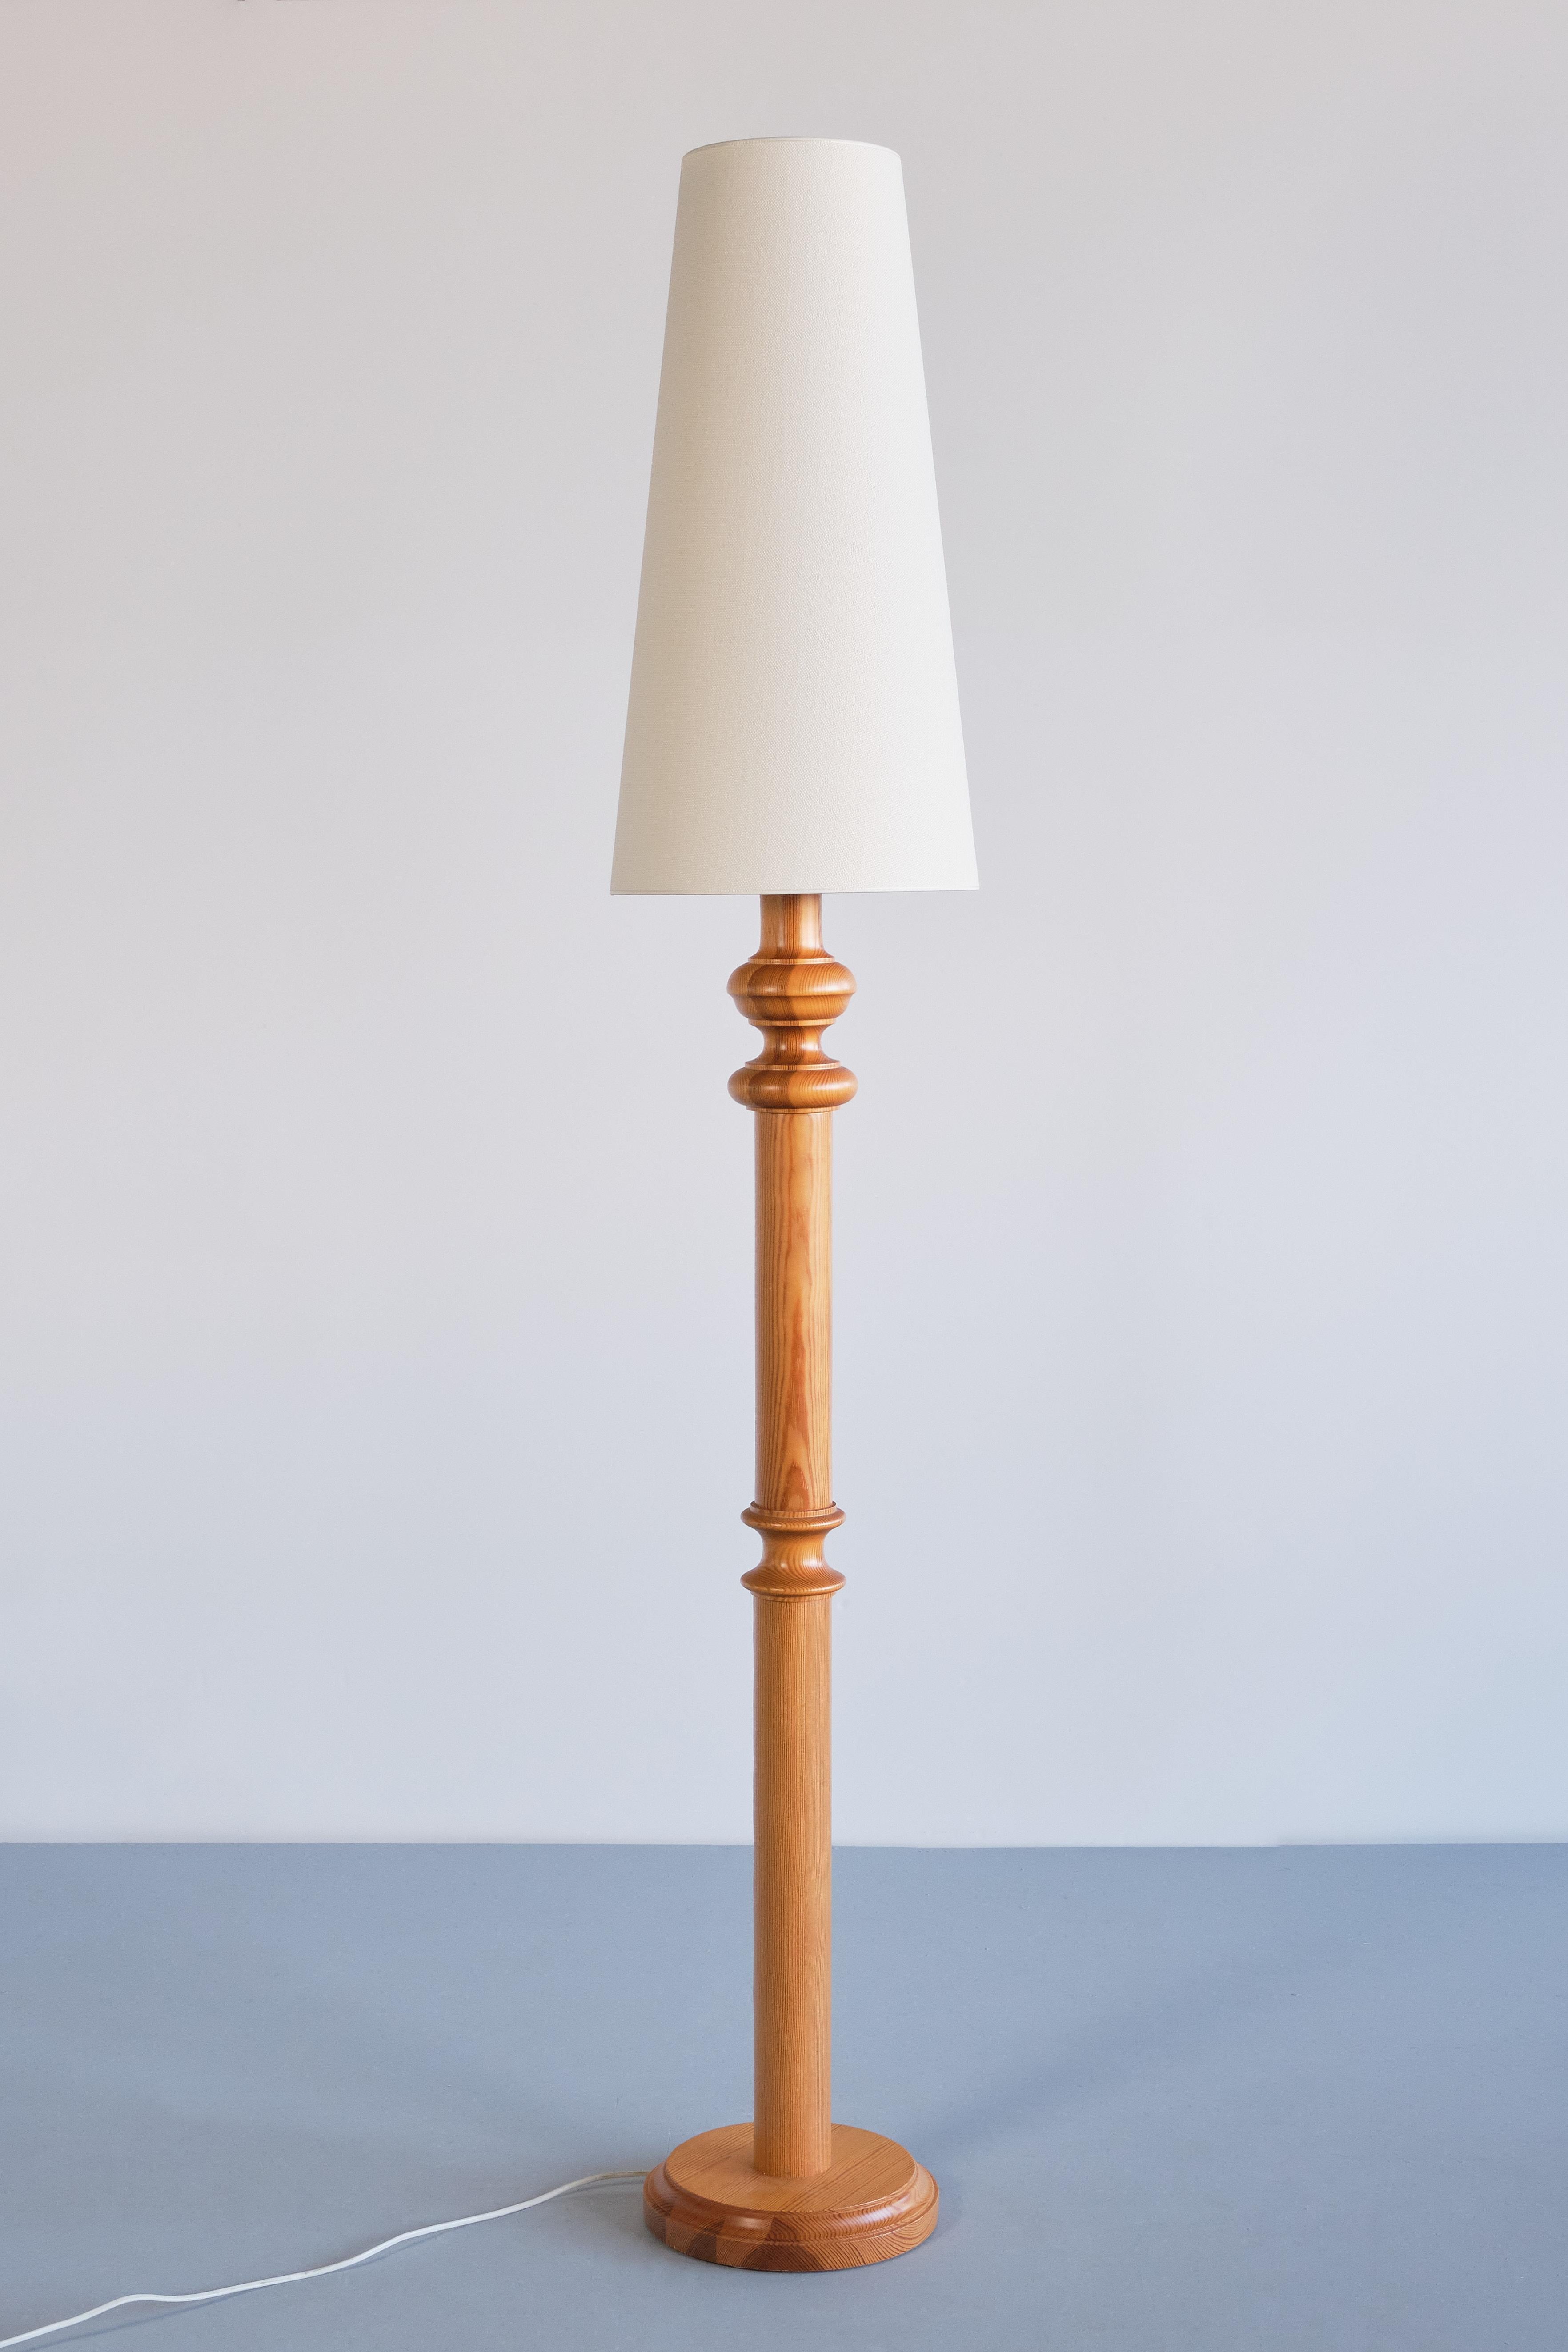 Nybro Armaturfabric Tall Floor Lamp in Solid Pine Wood, Sweden, 1960s For Sale 5